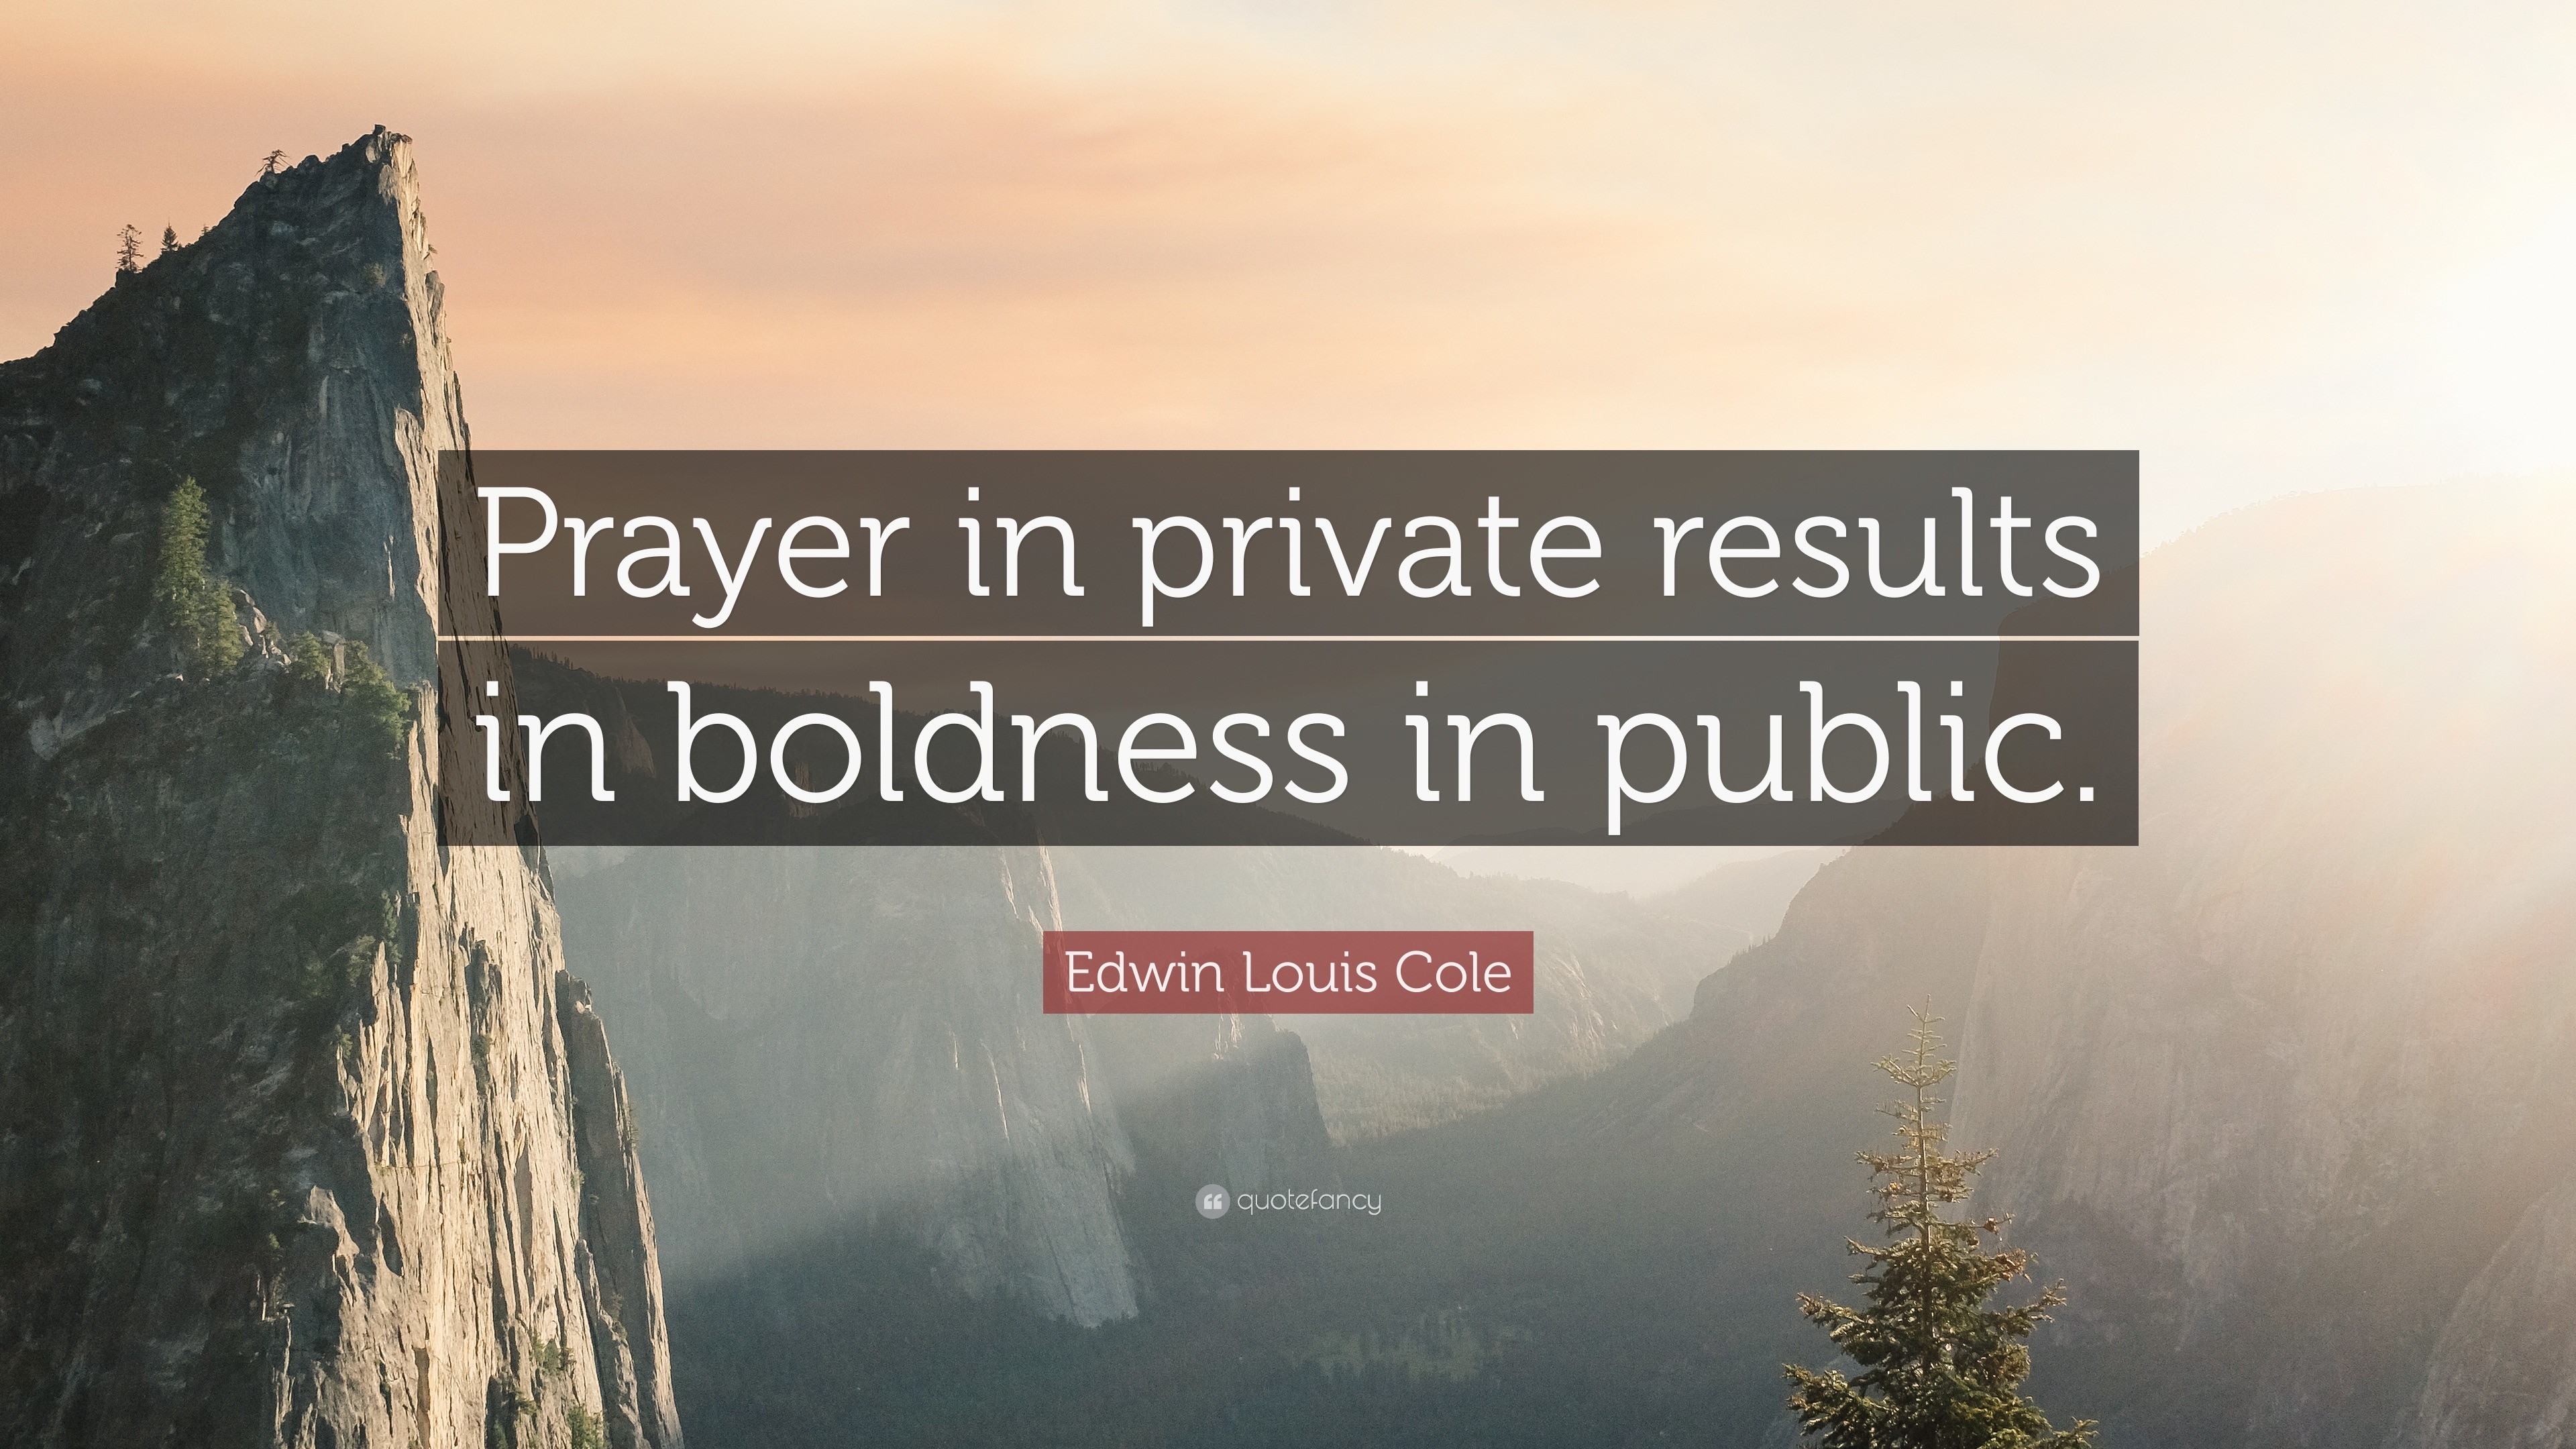 Top 10 Edwin Louis Cole Quotes - BrainyQuote